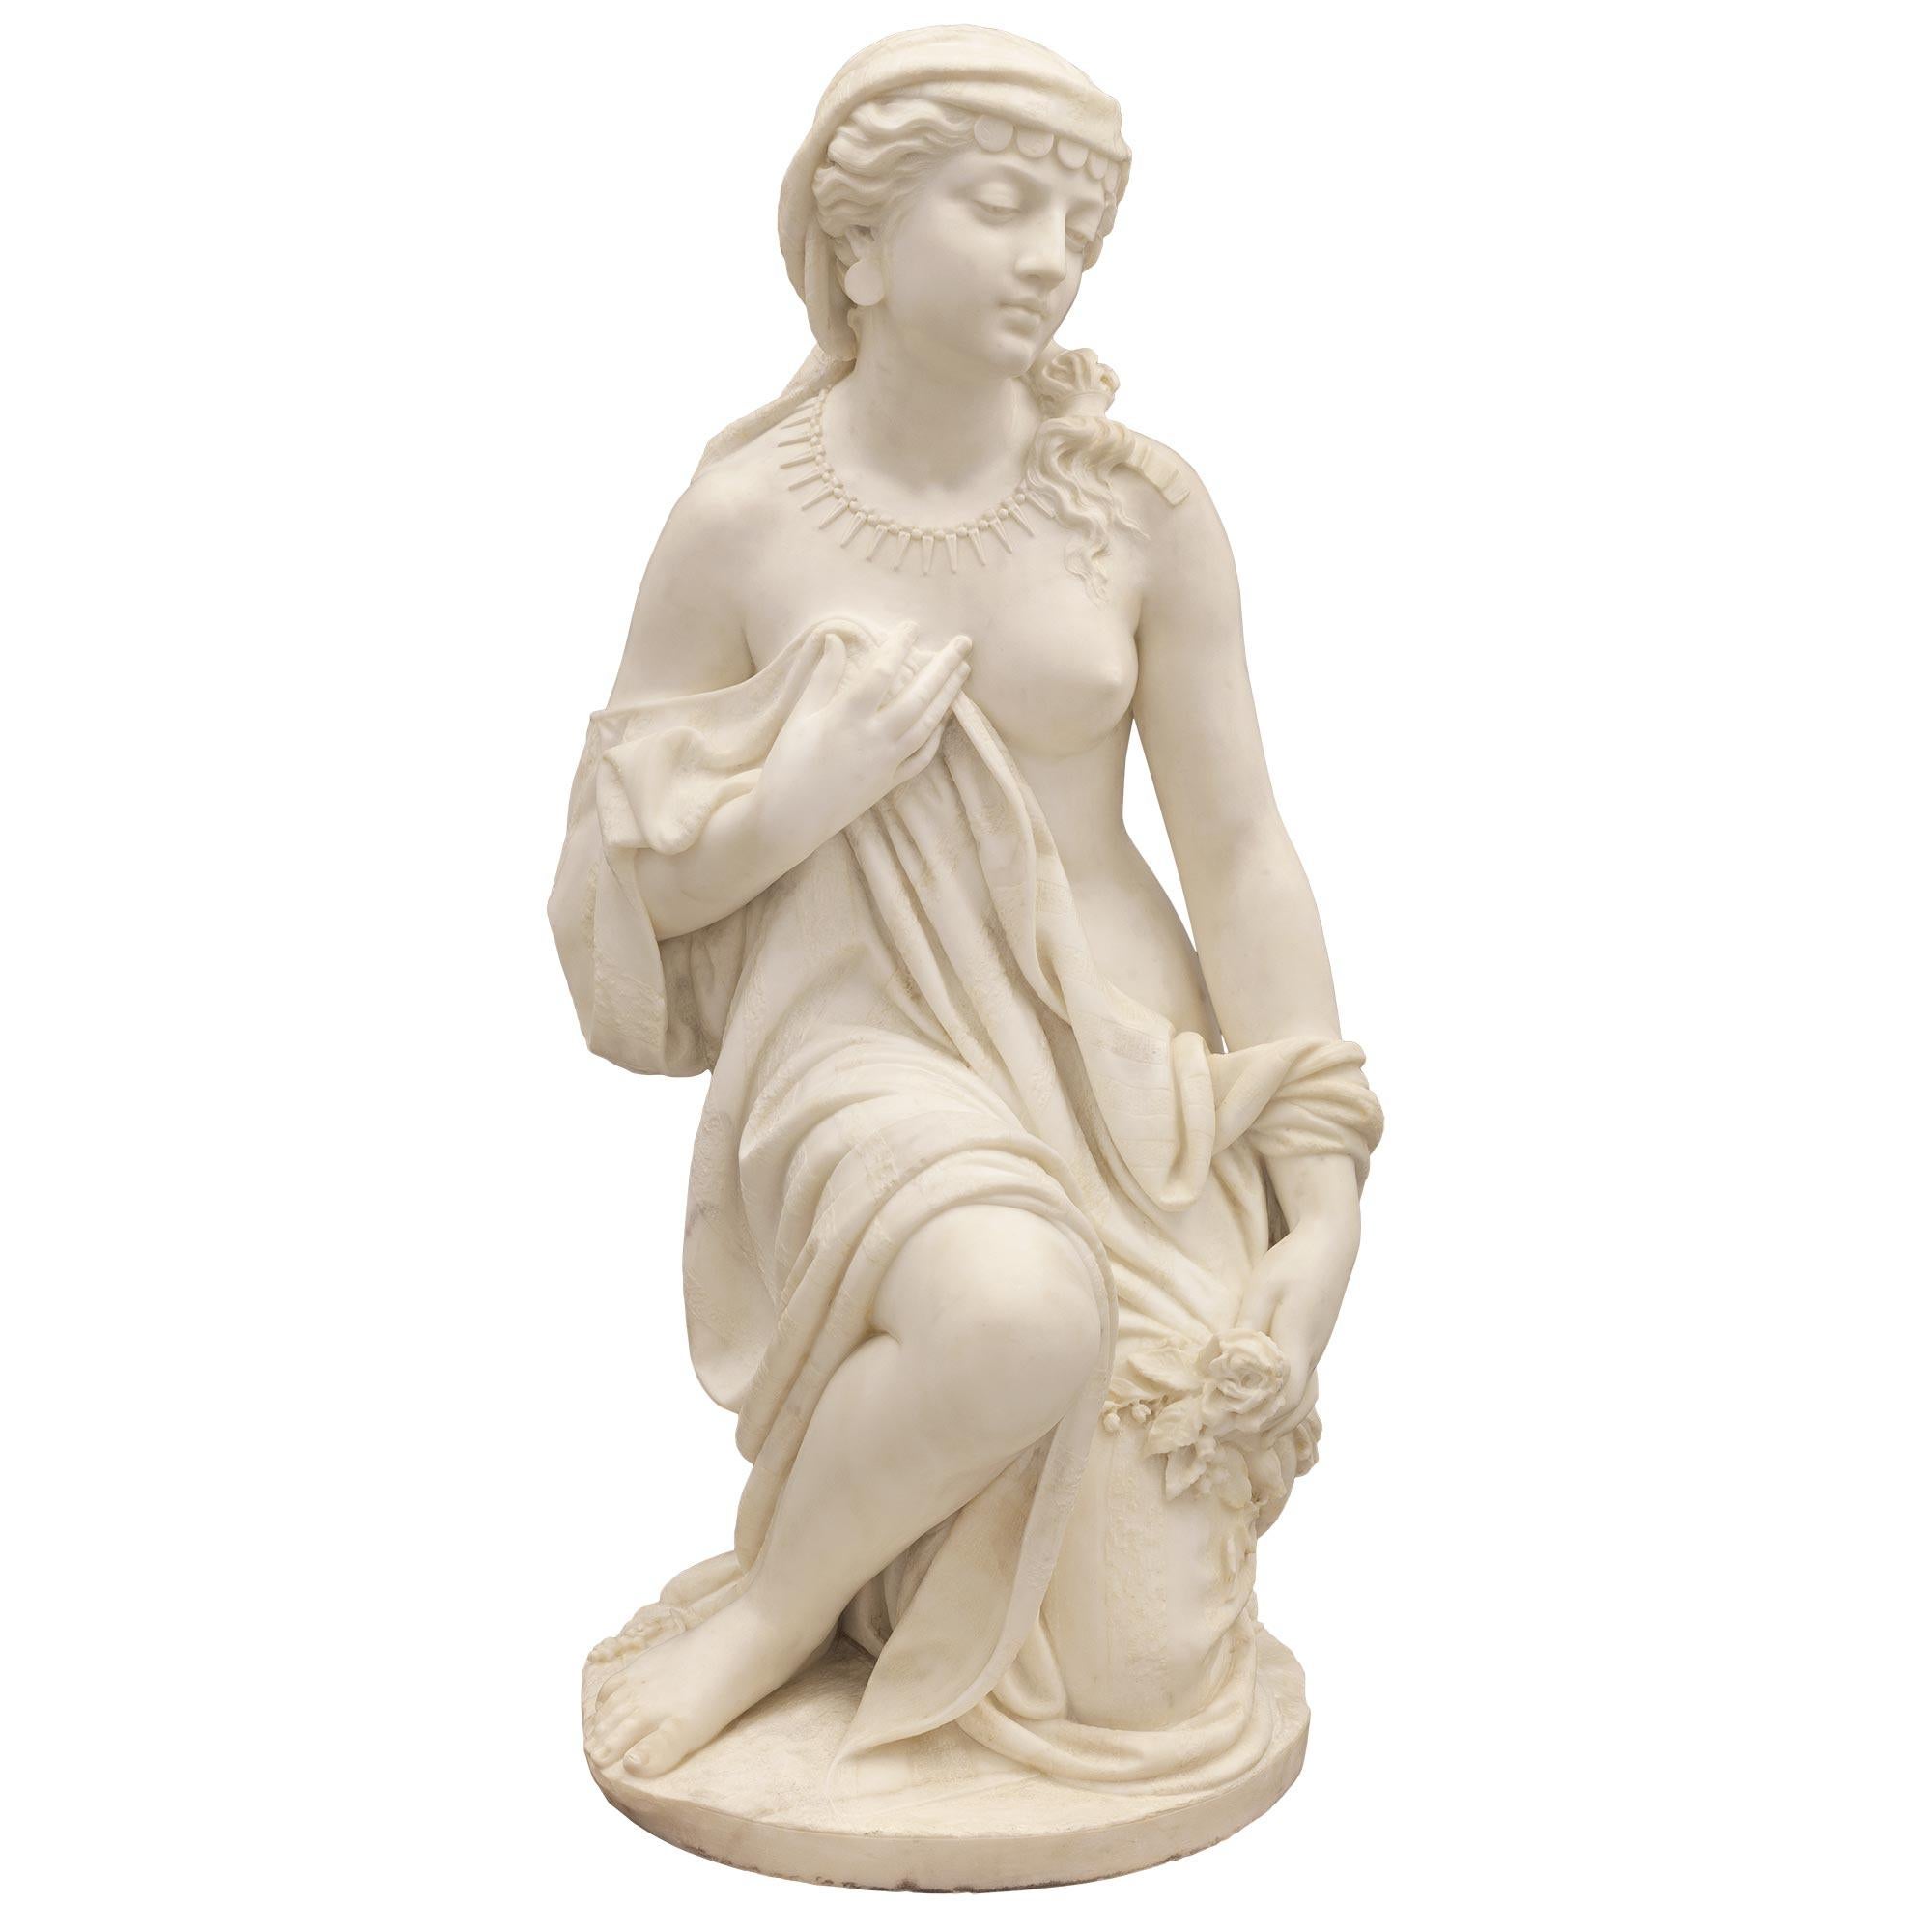 A stunning and very high quality Italian turn of the century white Carrara marble statue signed Prof. R. Romanelli 1909. The statue is raised by a circular base with a fine ground like design where the beautiful maiden is kneeling. She is draped in